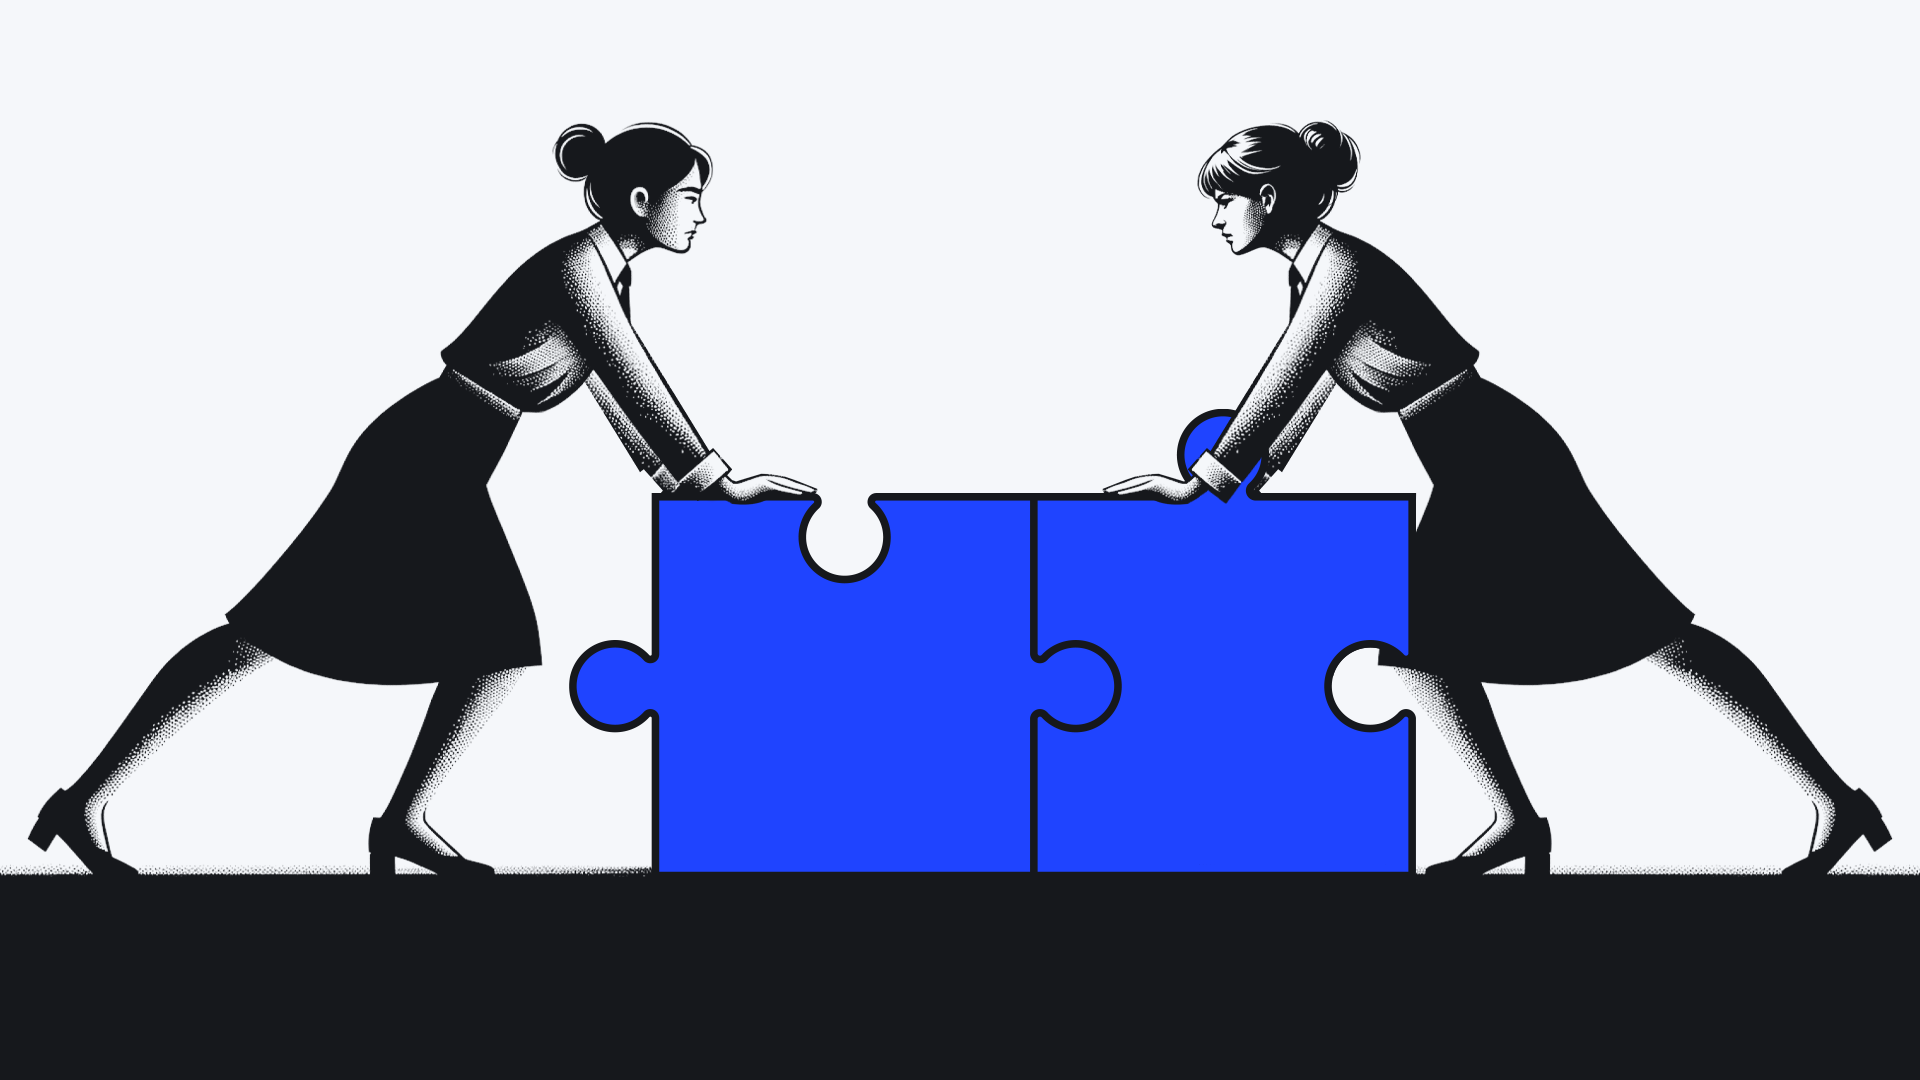 Two stylized women push together large puzzle pieces on a monochrome background. #Collaboration #ProblemSolving #Art